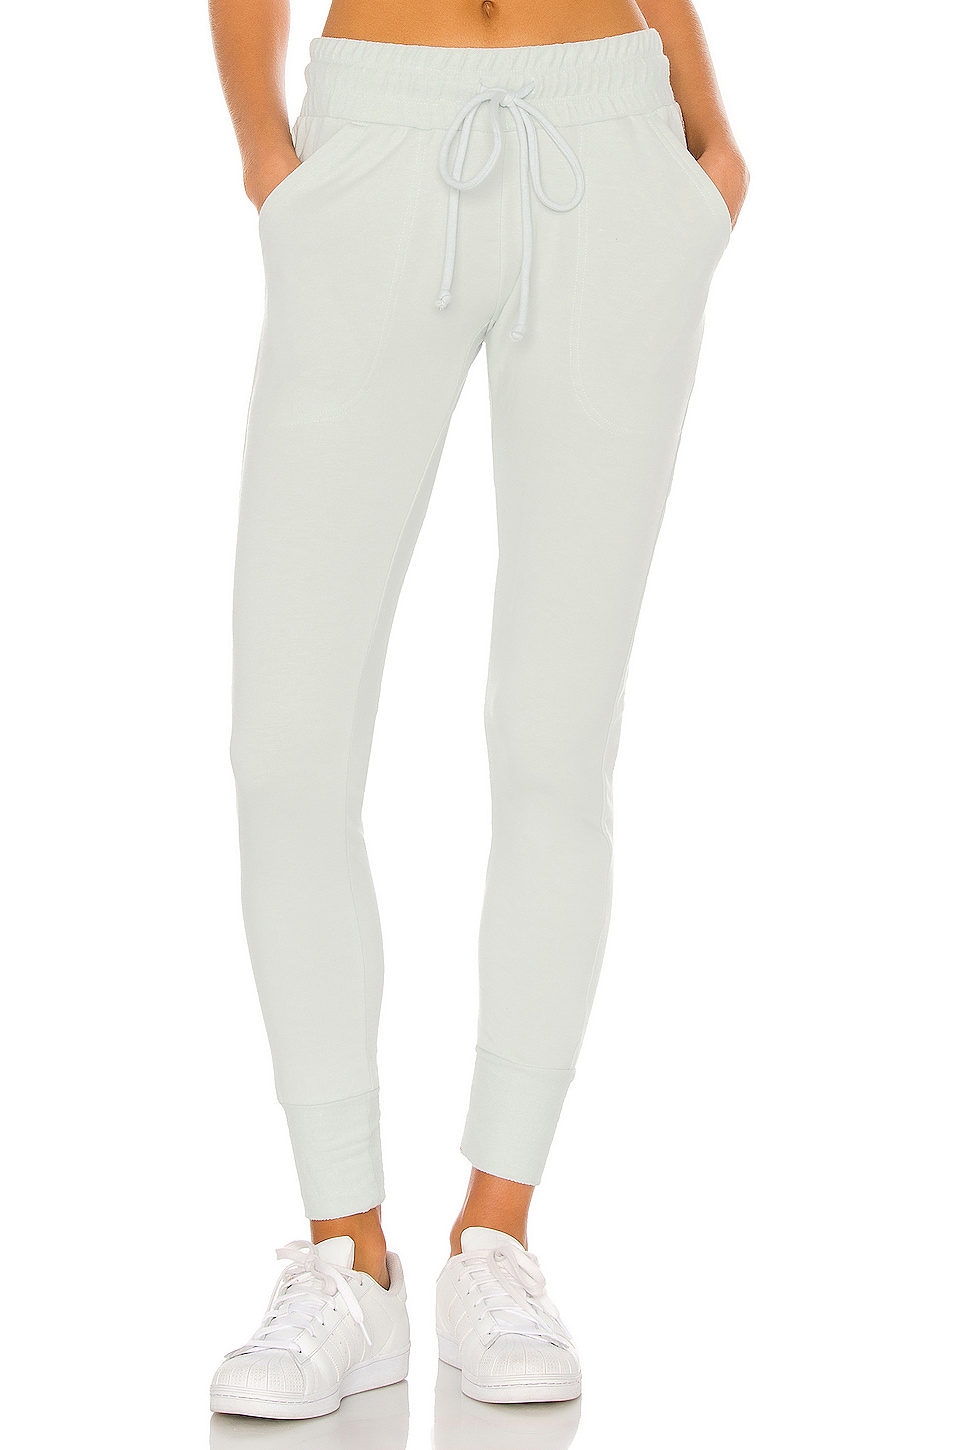 Free People X FP Movement Sunny Skinny Sweatpant in Ice Blue | REVOLVE